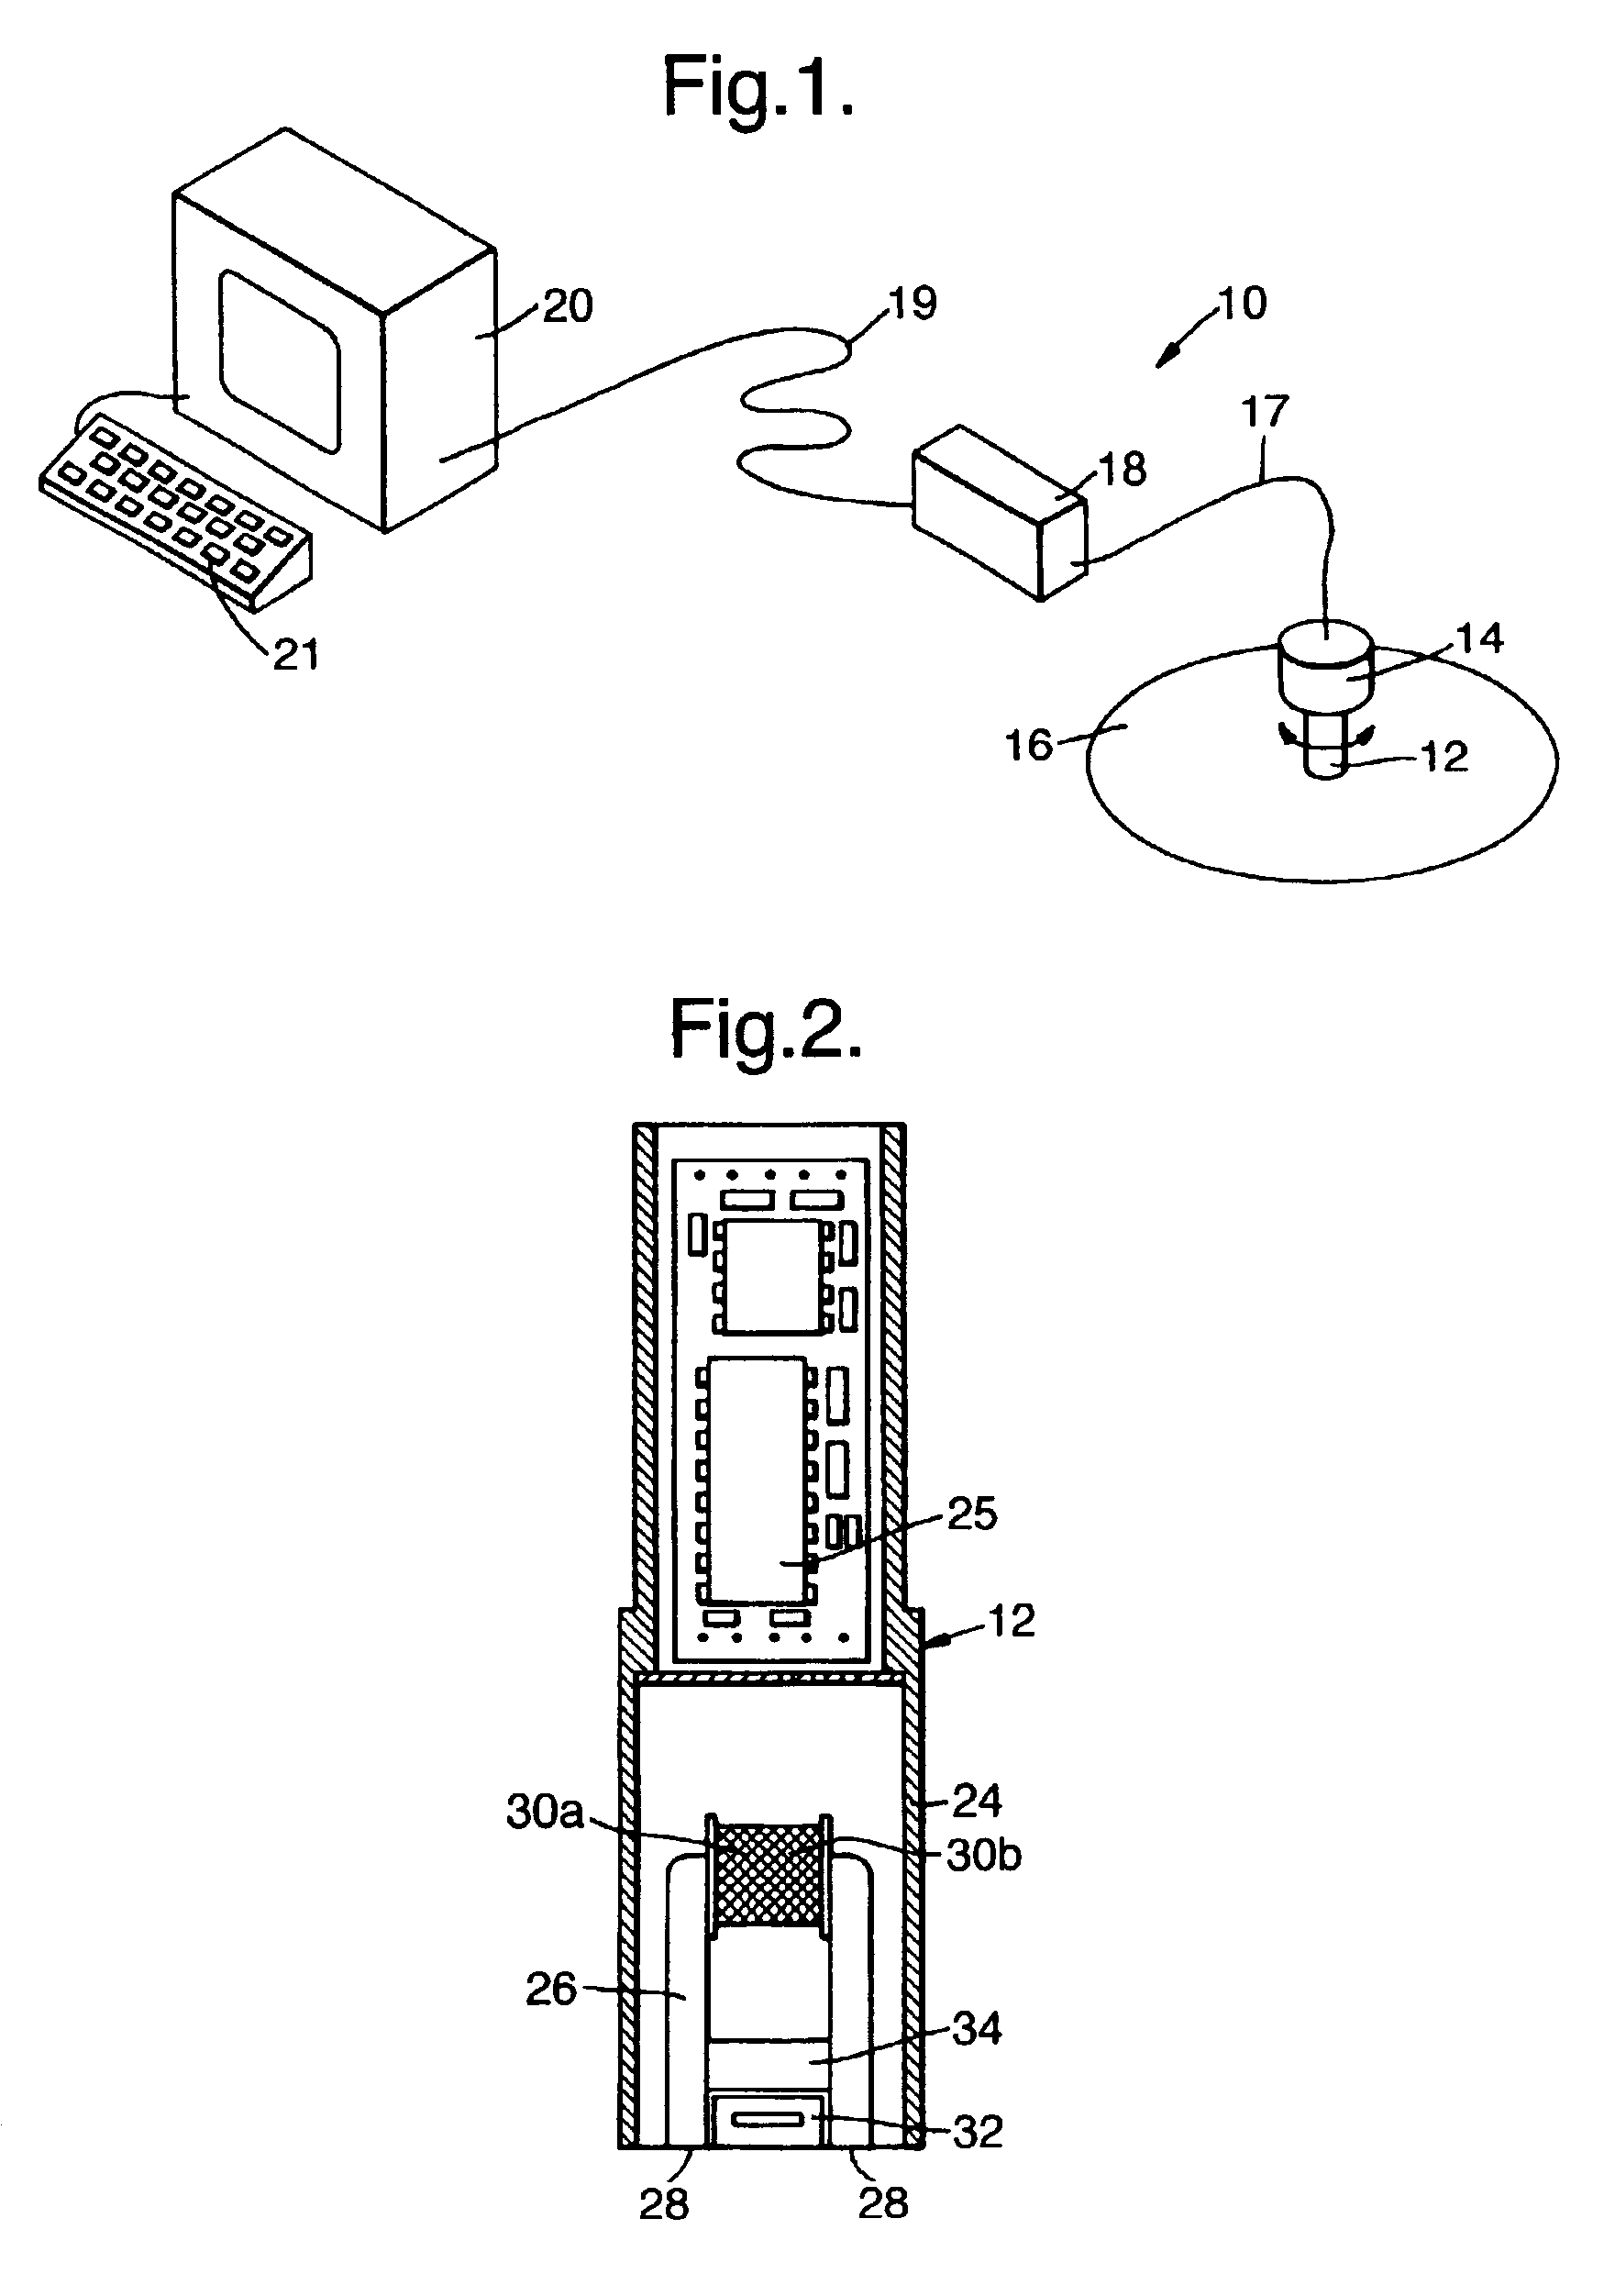 Detection of rolling contact fatigue